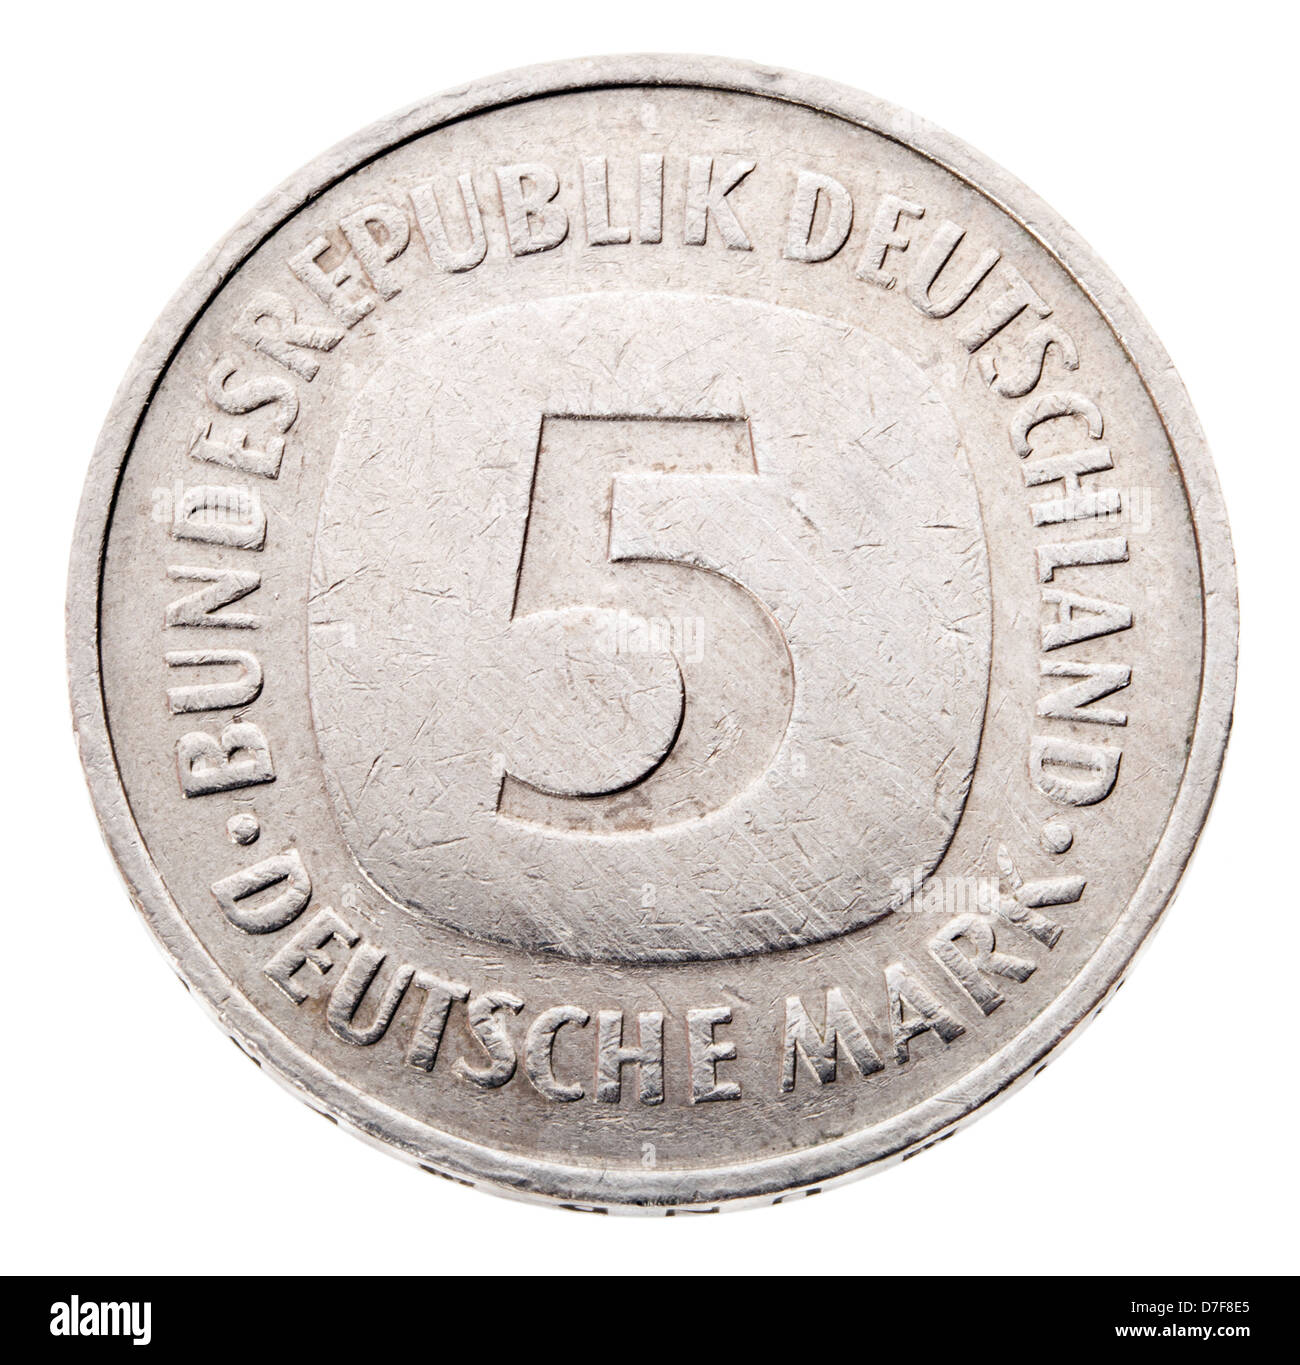 Deutsche mark Cut Out Stock Images & Pictures - Alamy